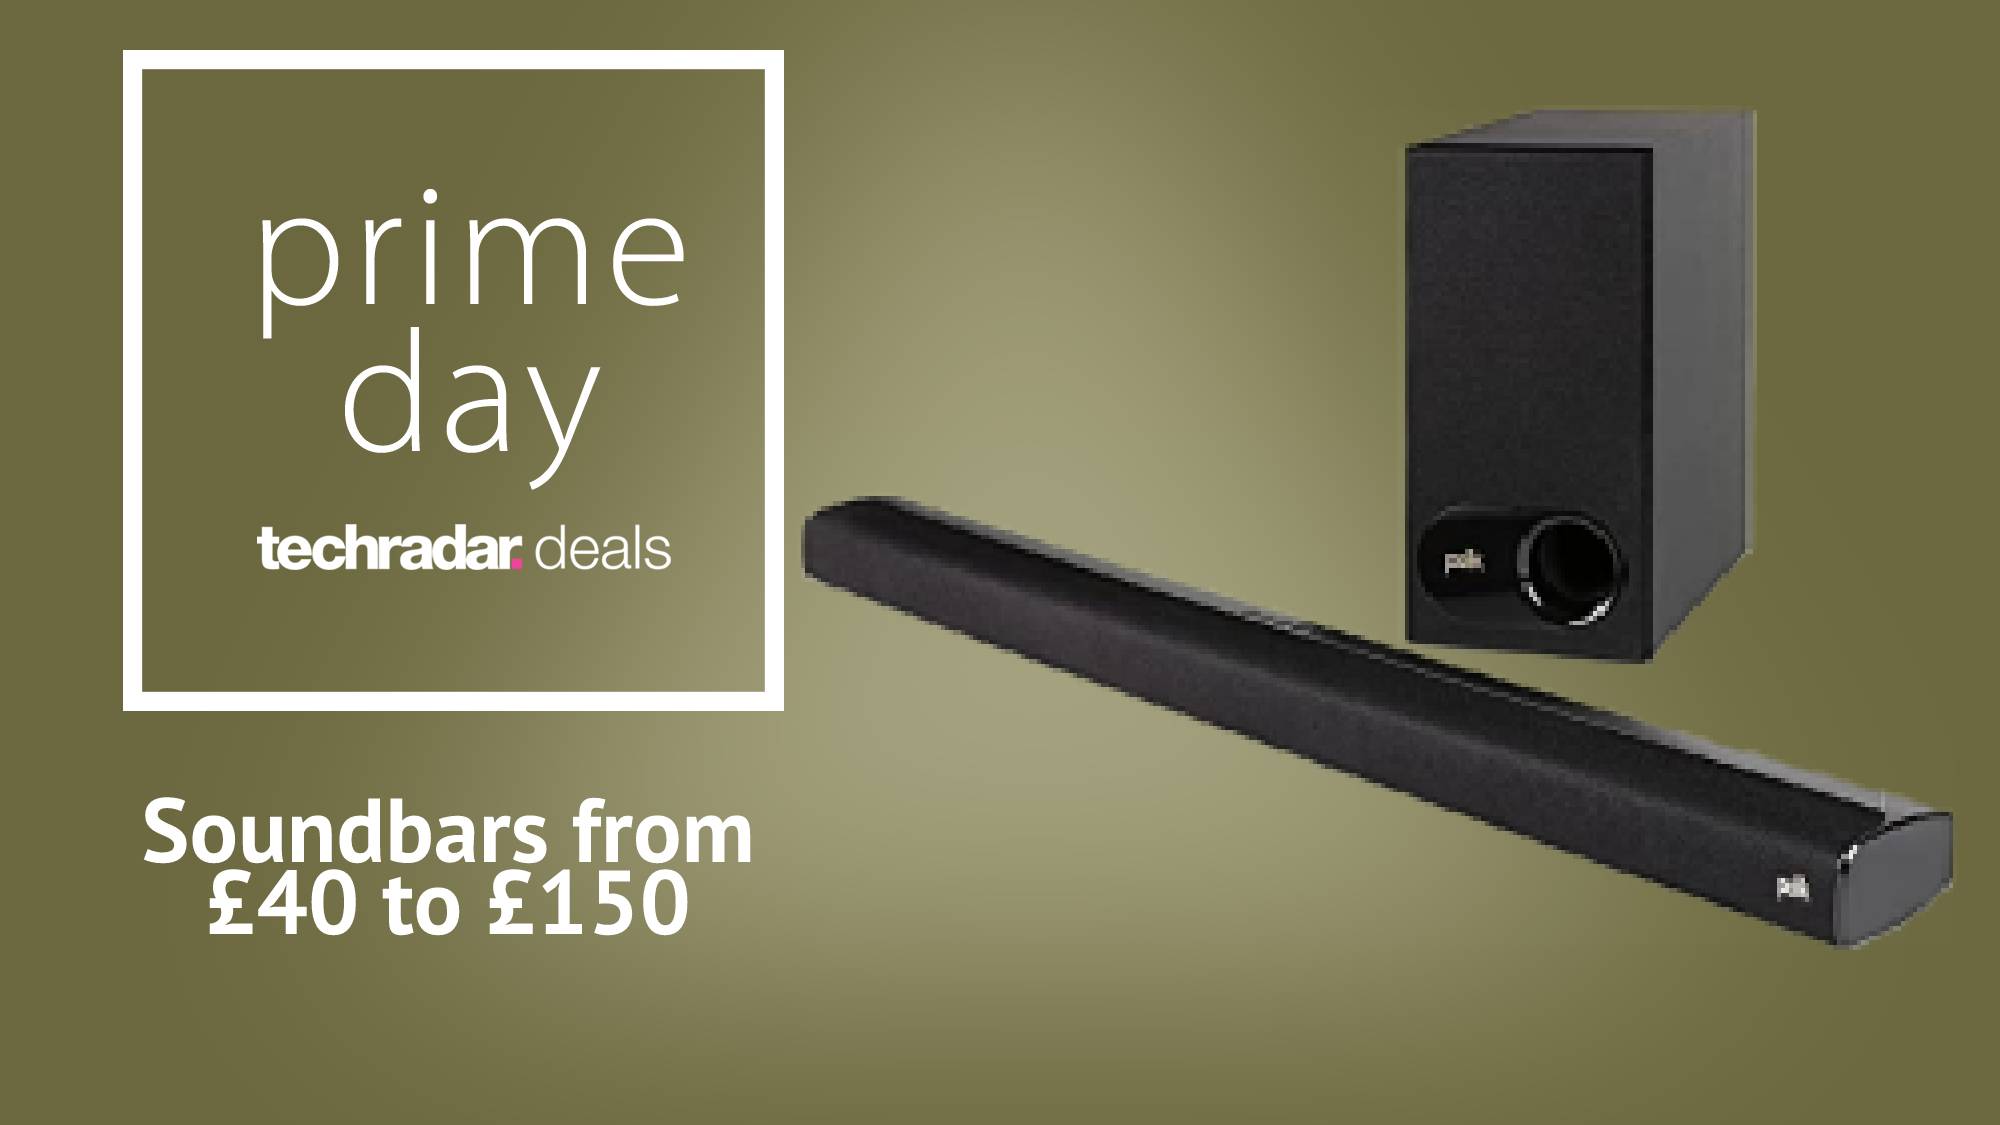 Top 4 Prime Day soundbar deals from £40 to £150